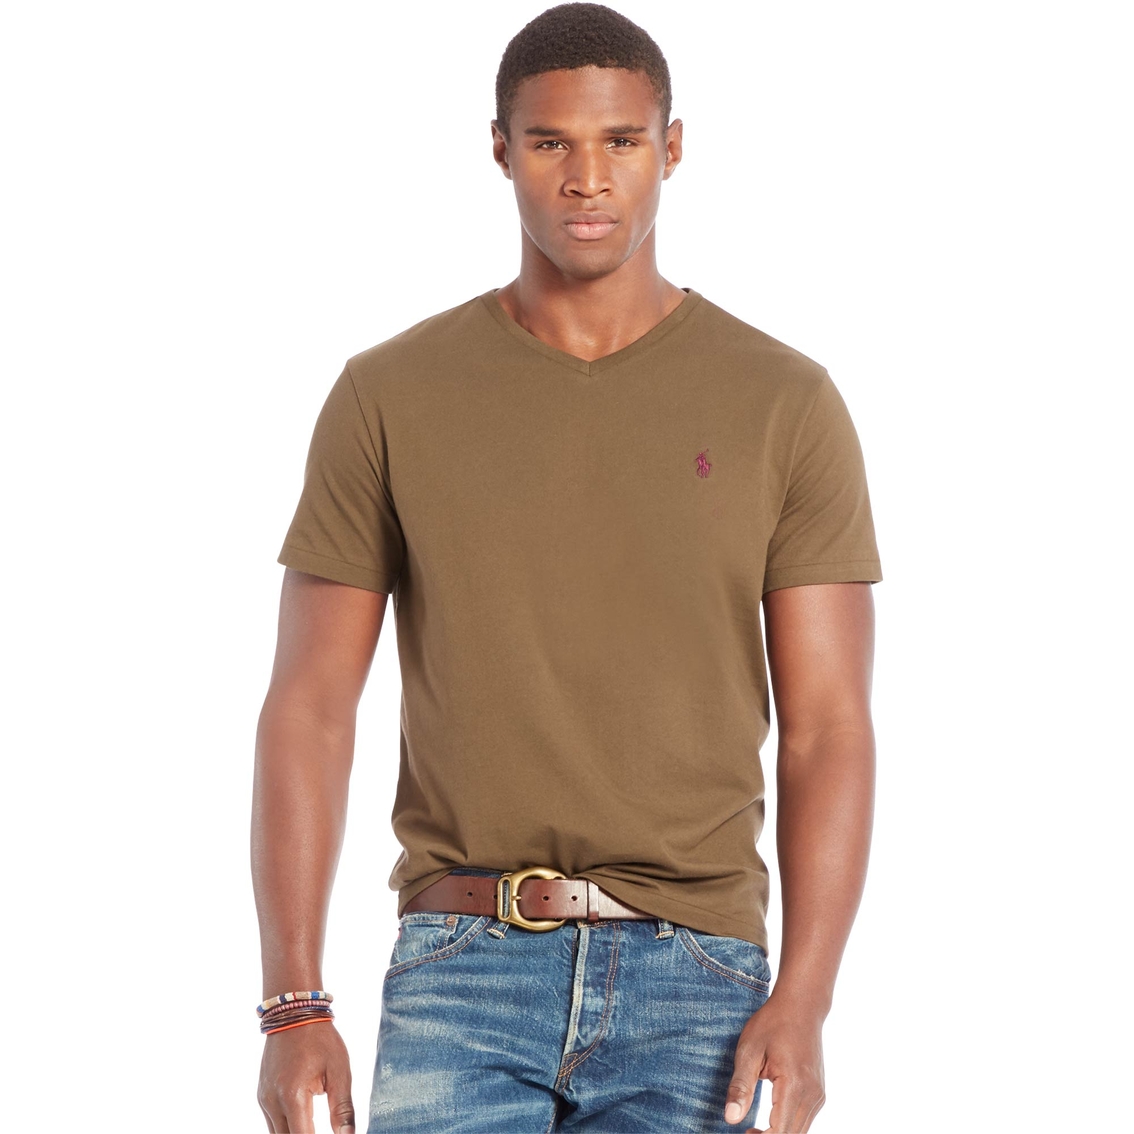 Polo Ralph Lauren Cotton Jersey V Neck Tee | Shirts | Clothing ...